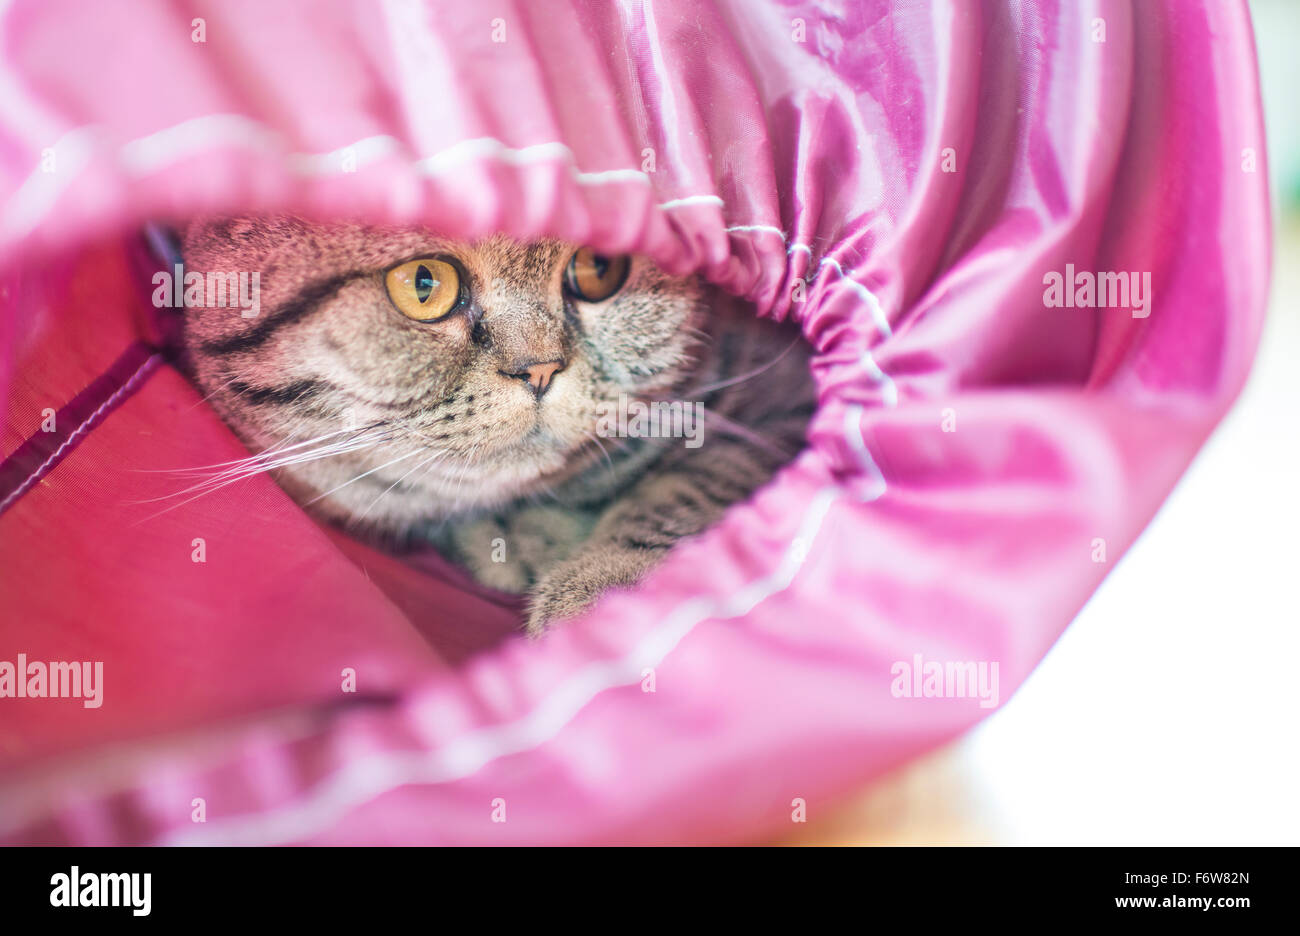 Playful cat on adventure. Playing inside pet toy, looking out. Stock Photo